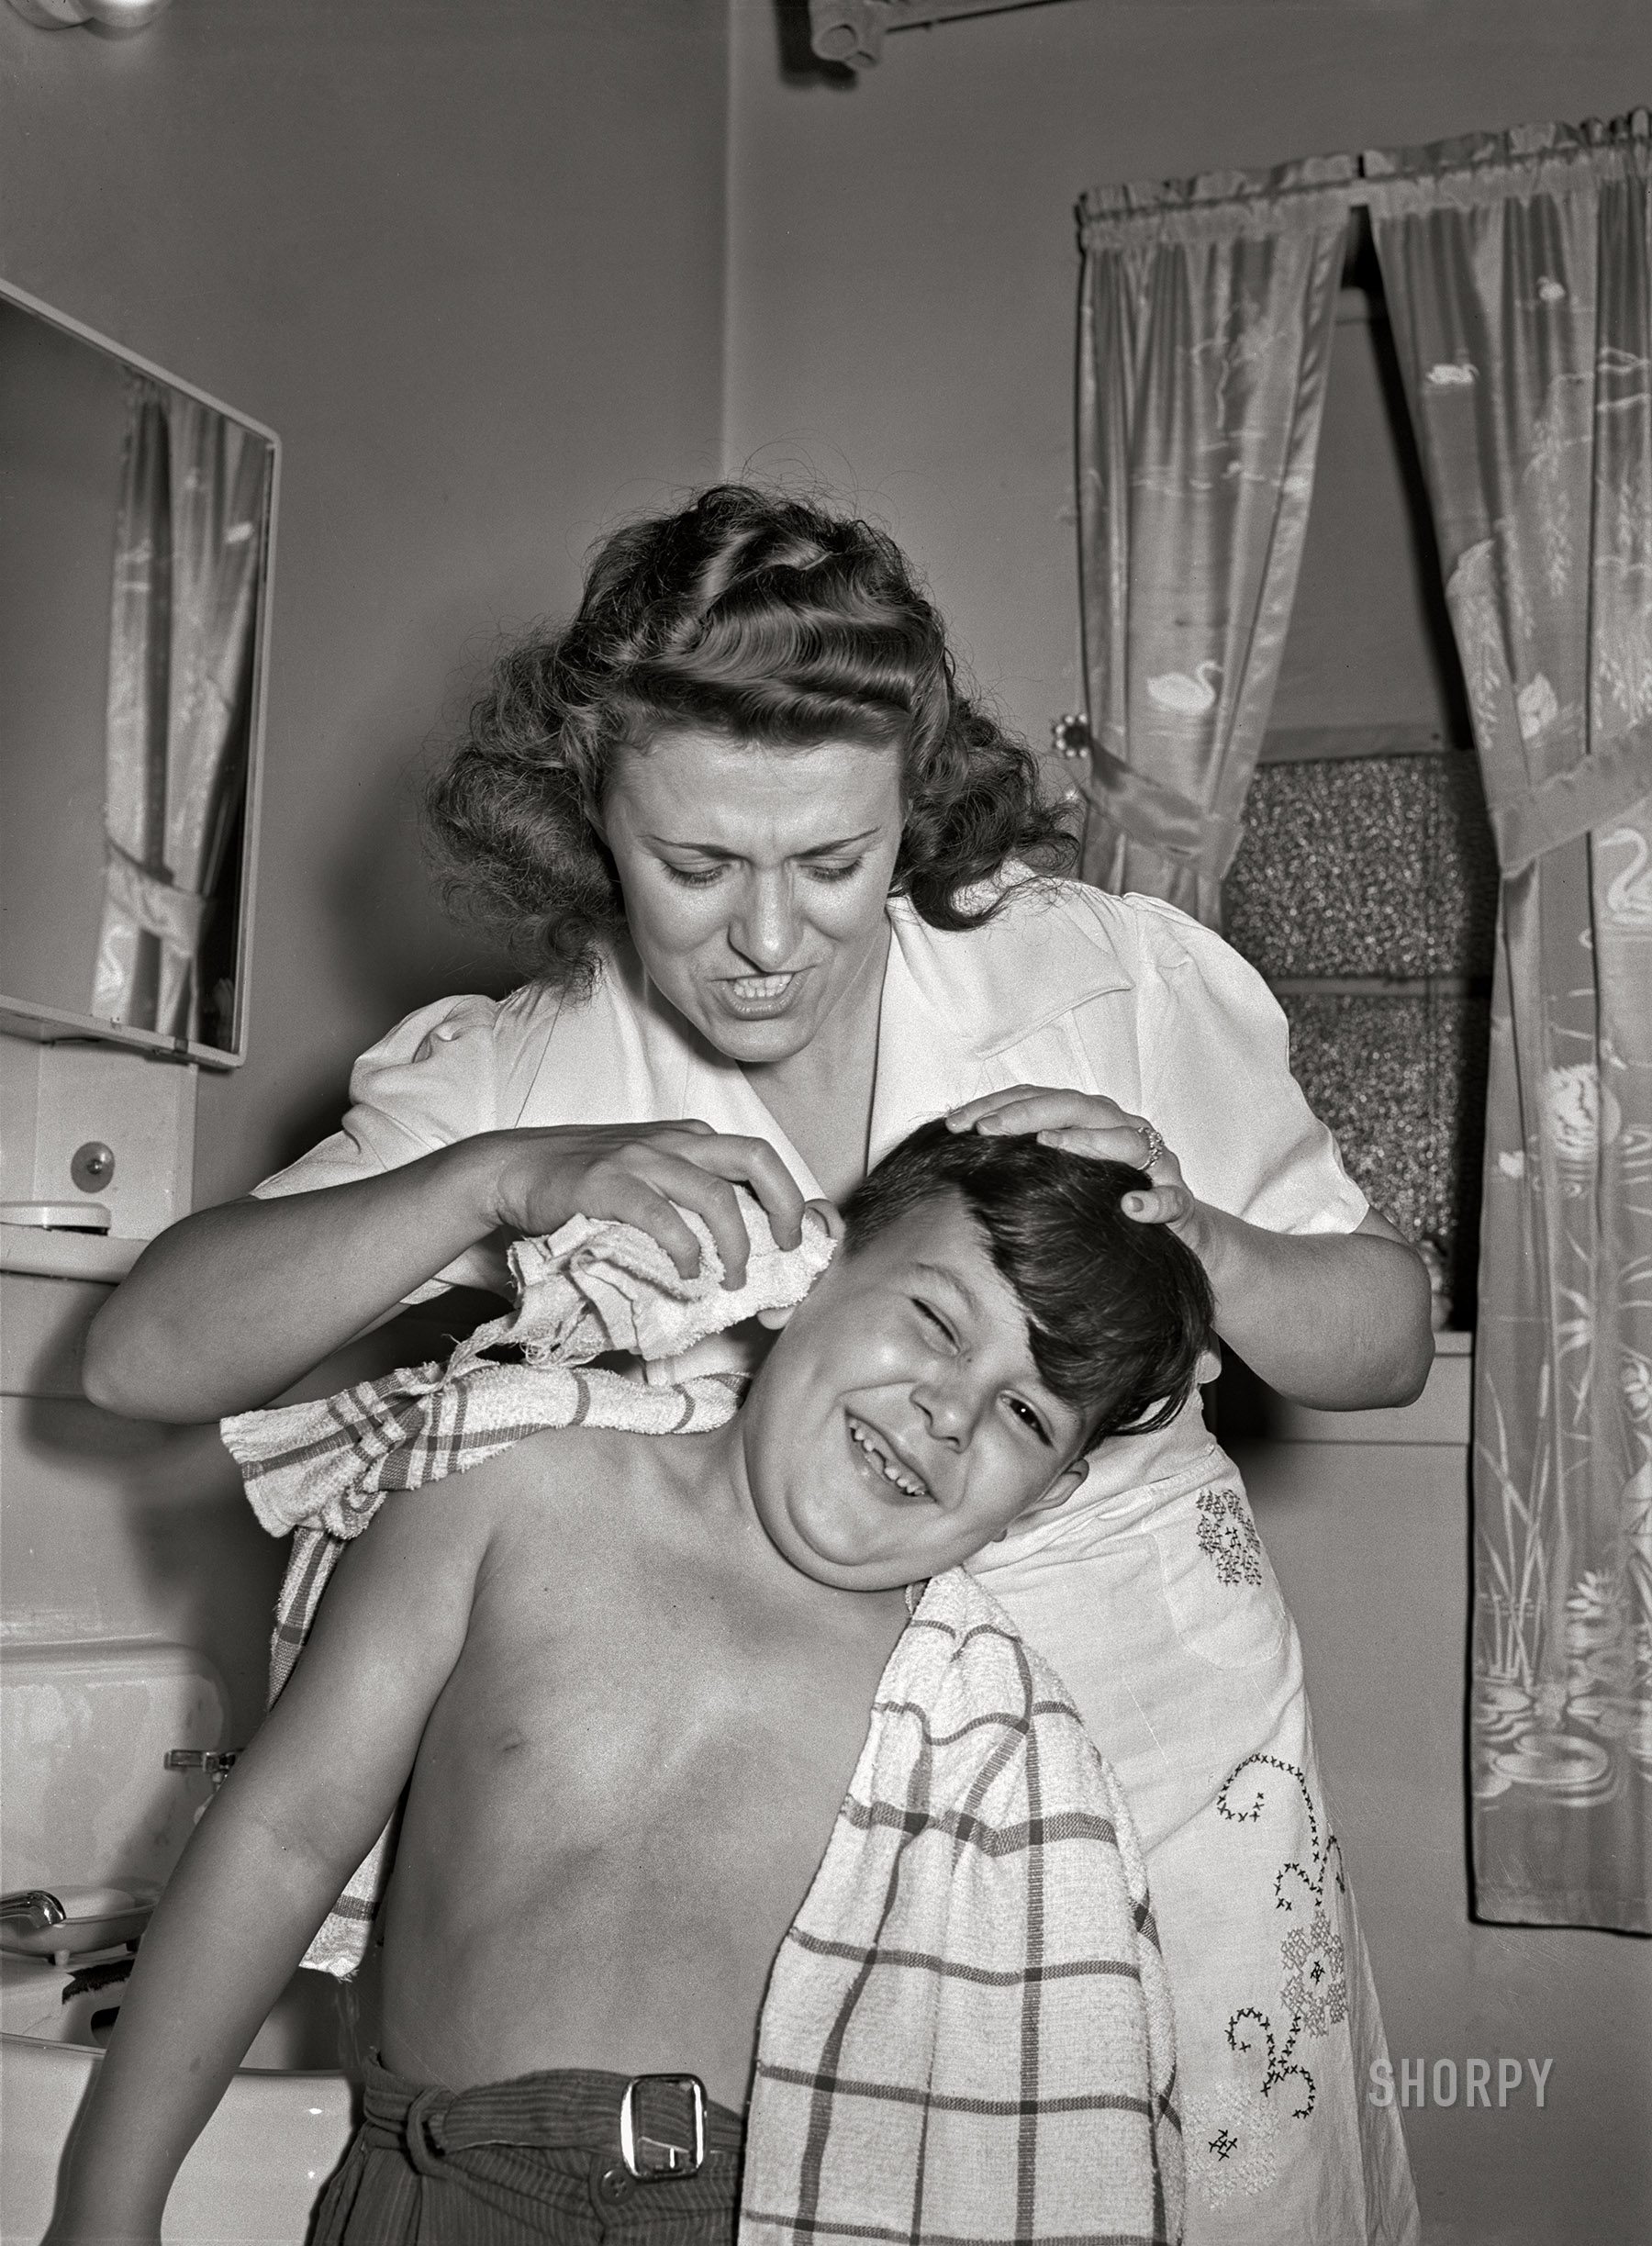 June 1942. "Brooklyn, New York. Red Hook housing project. Mrs. Caputo washes son Jimmy's ears. He is recovering from infantile paralysis." Photo by Arthur Rothstein. View full size.